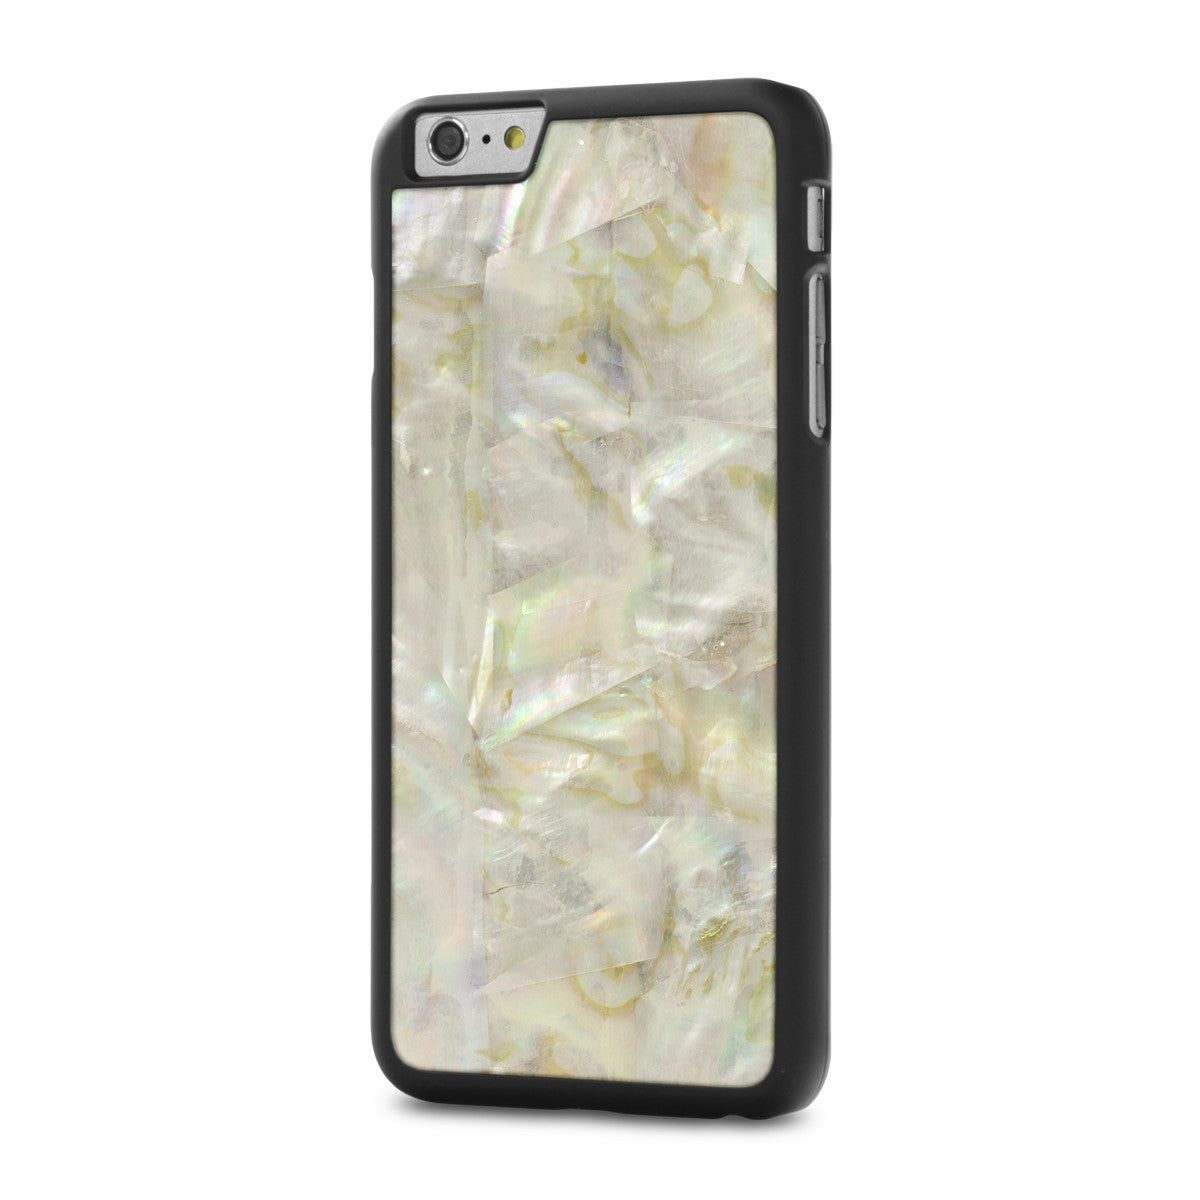 iPhone 6 / 6s Plus — Shell Snap Case